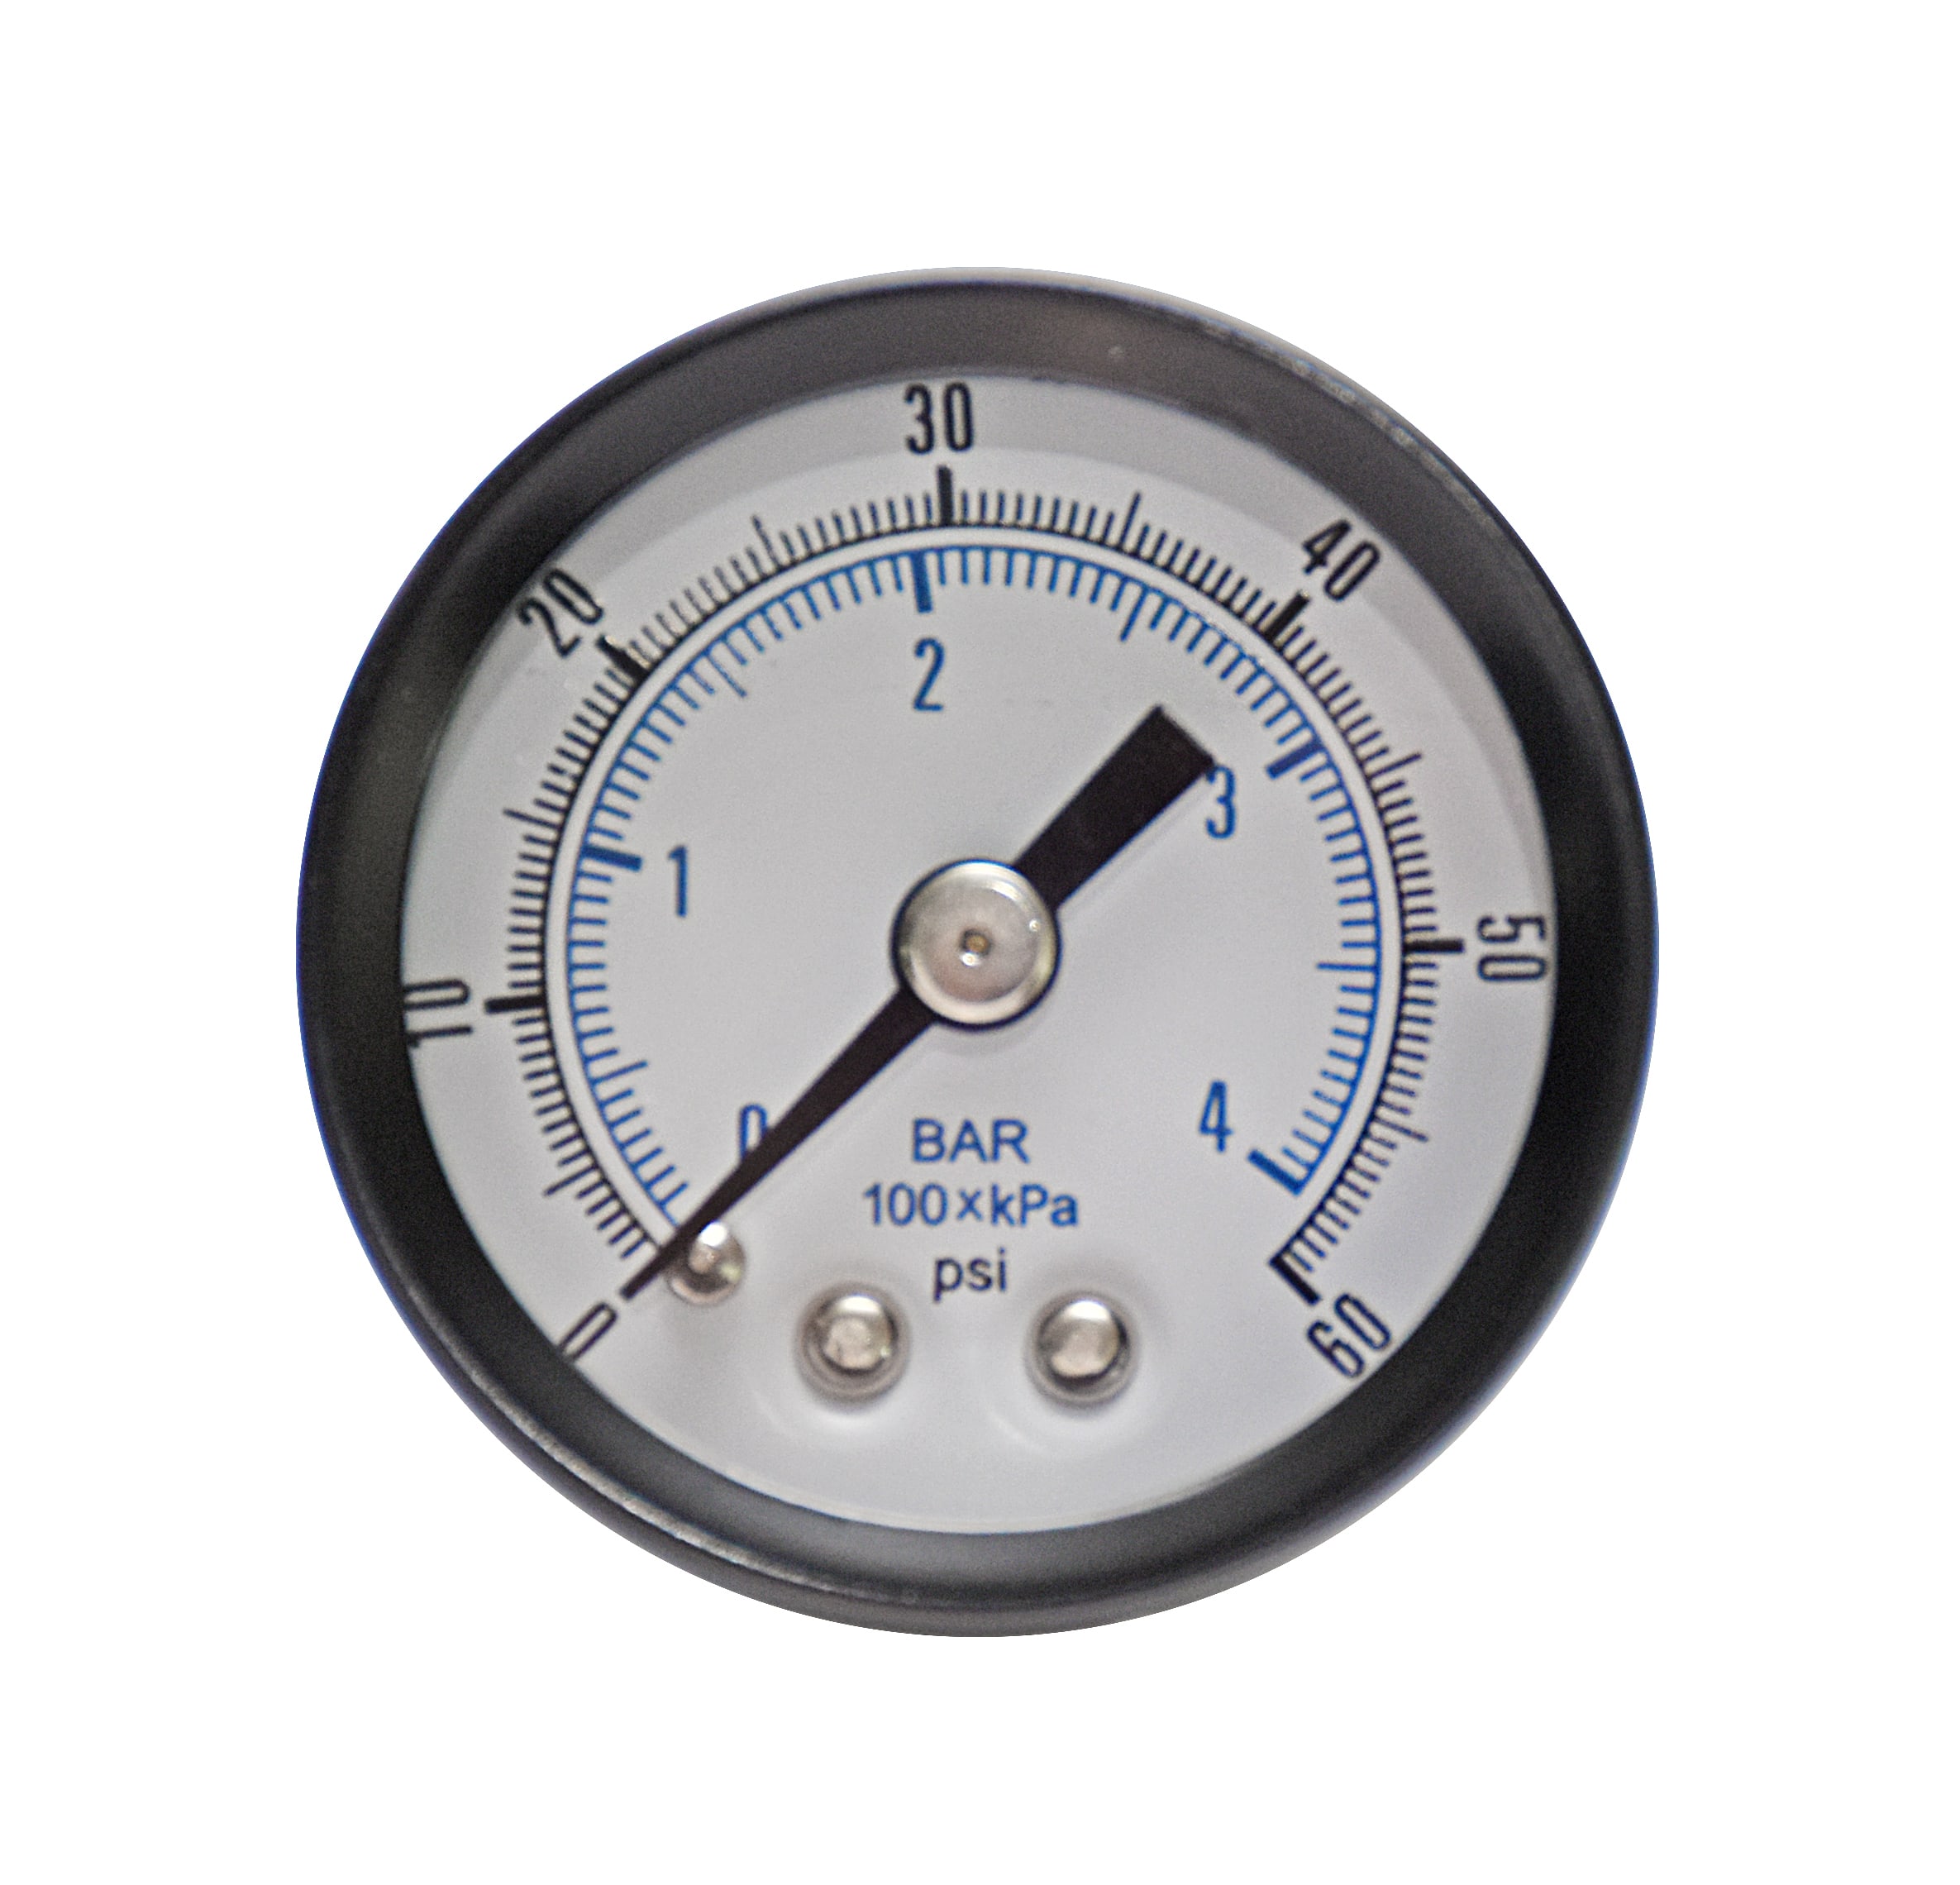 Gas Pressure Test Gauge 0-30 PSI with 1/2 PSI Increment 3/4 Inch FNPT Connection 